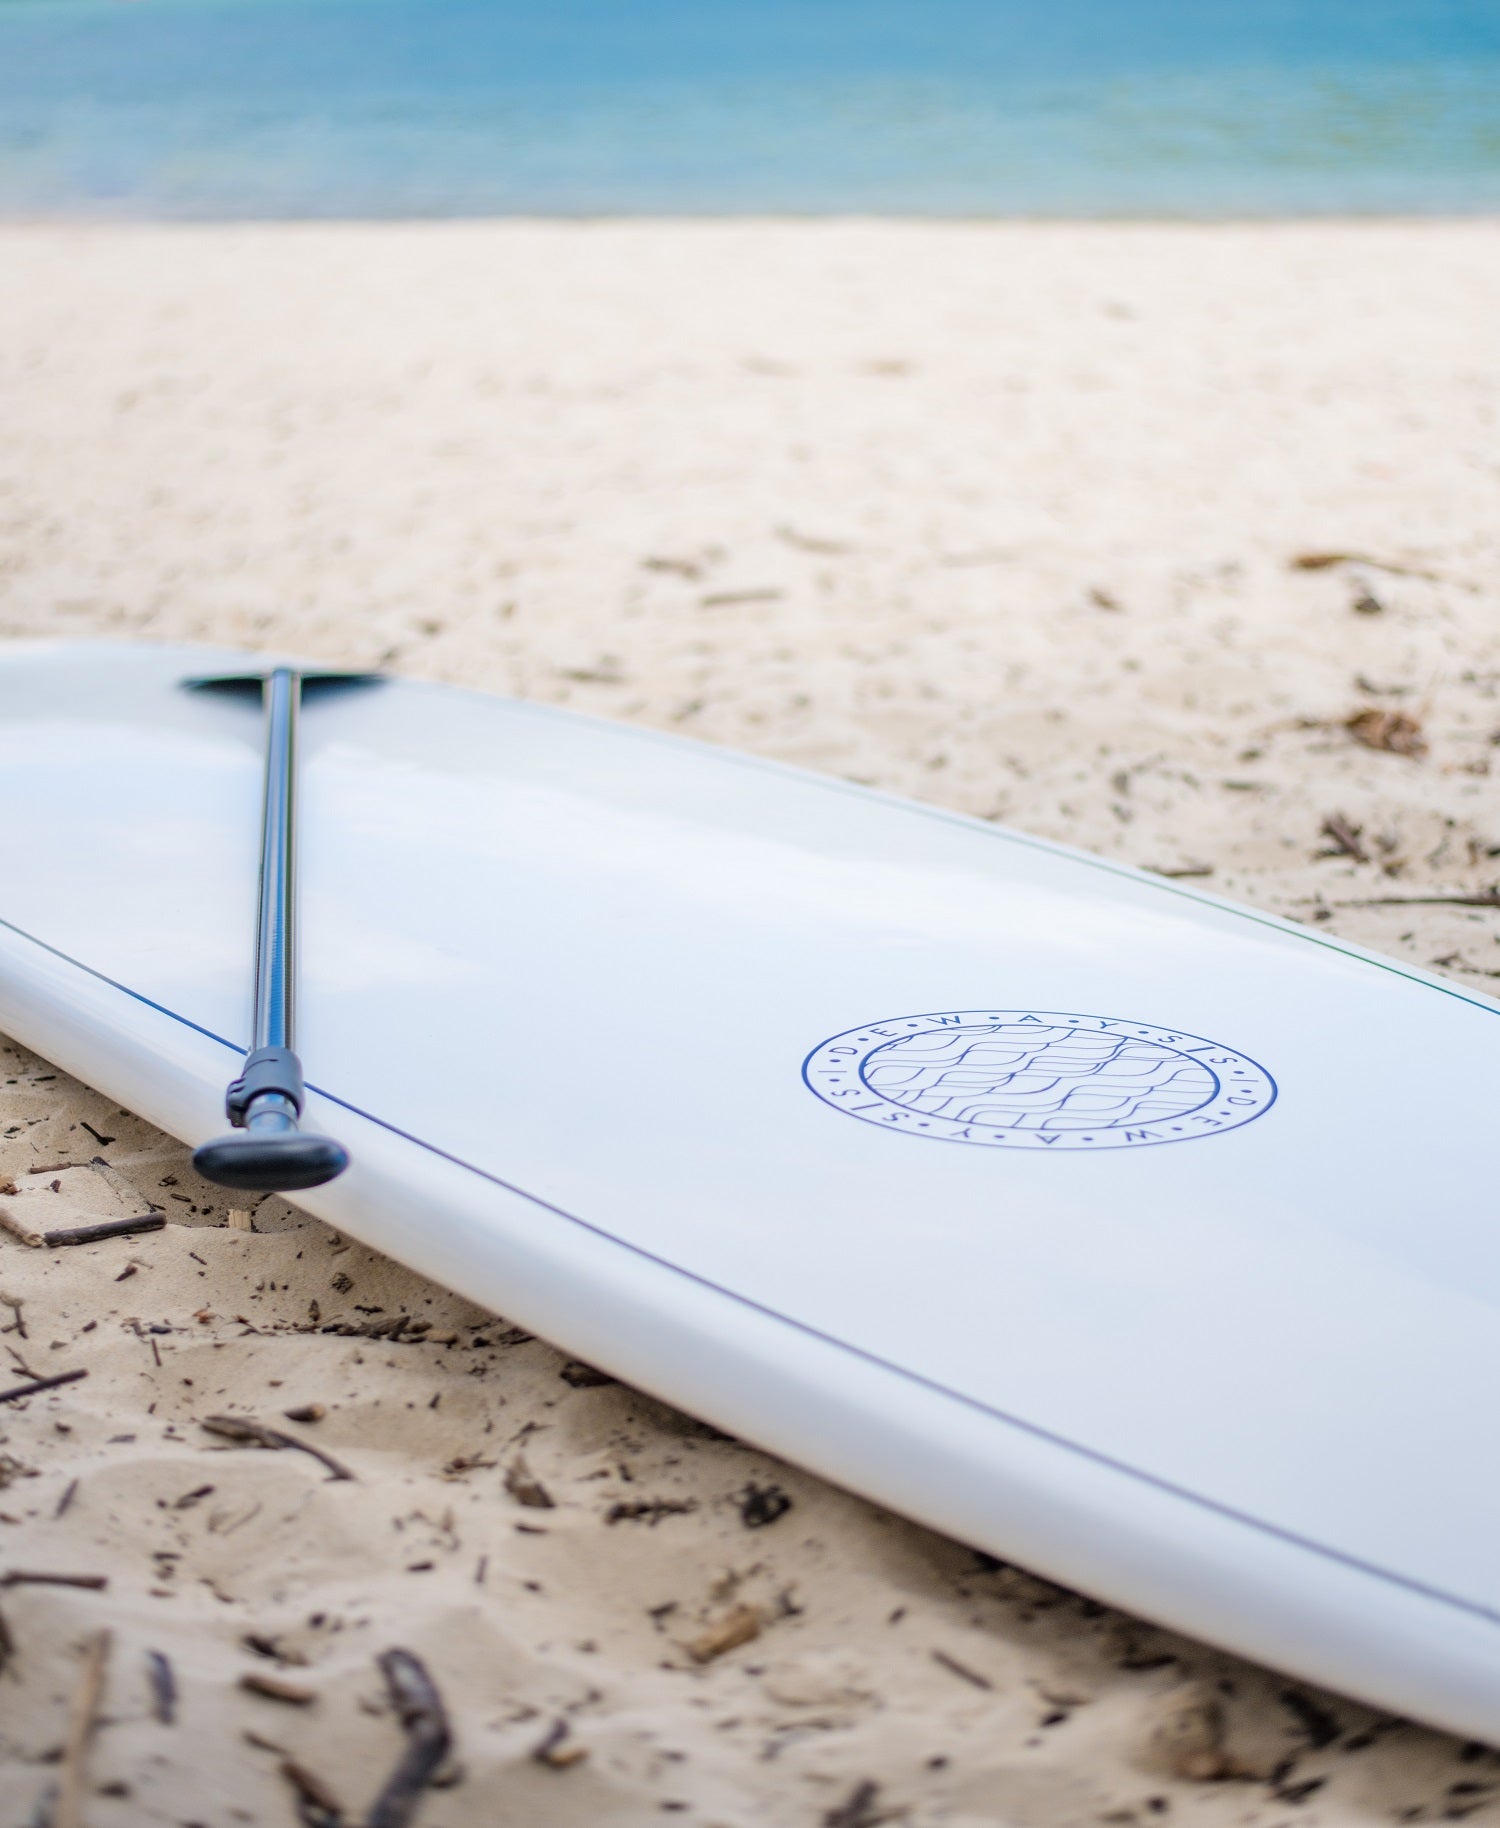 SIDEWAYS "CRUISER" STAND UP PADDLE BOARD